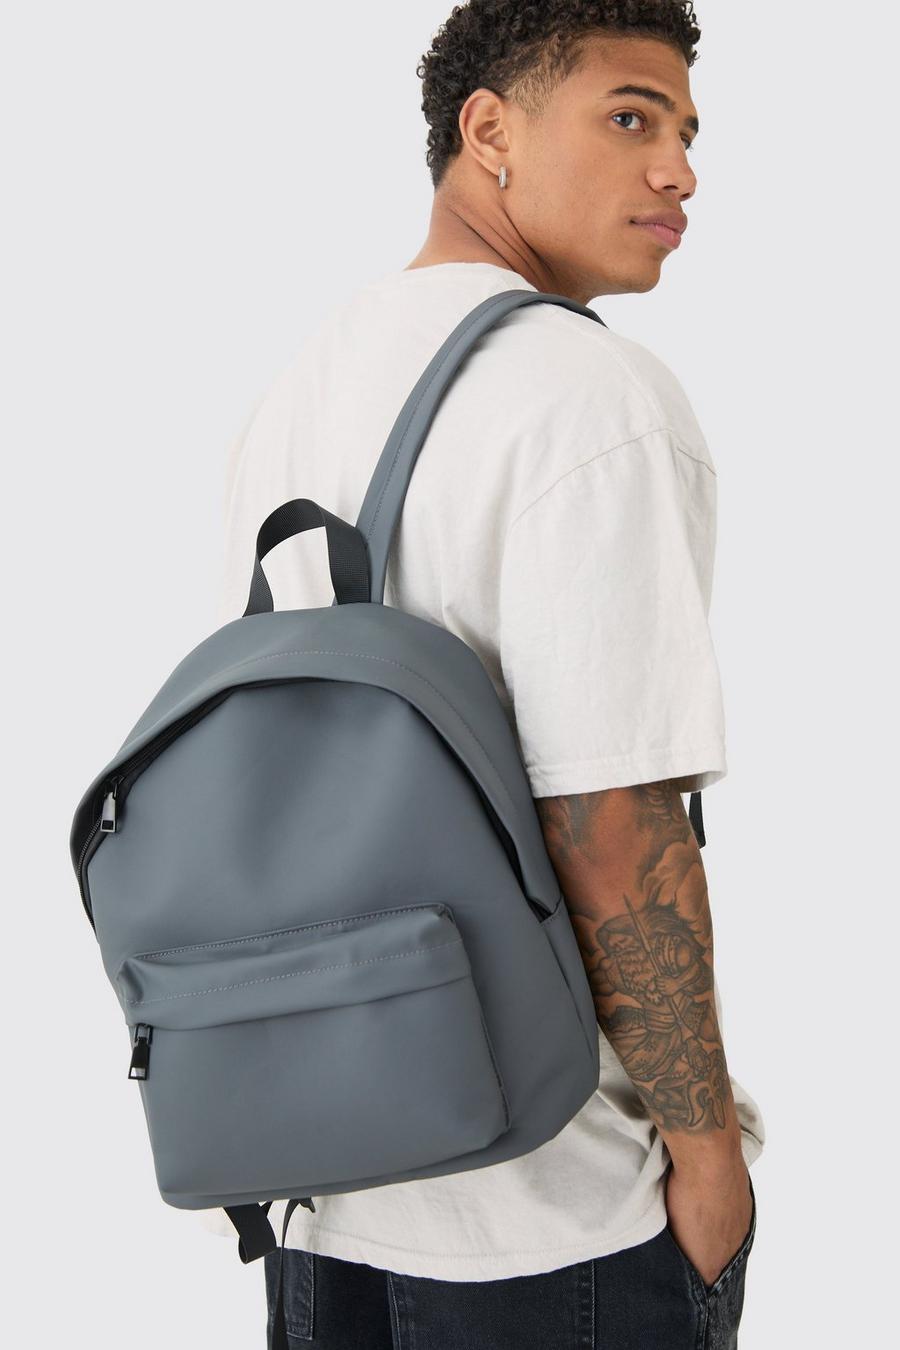 Basic Rucksack In Charcoal image number 1